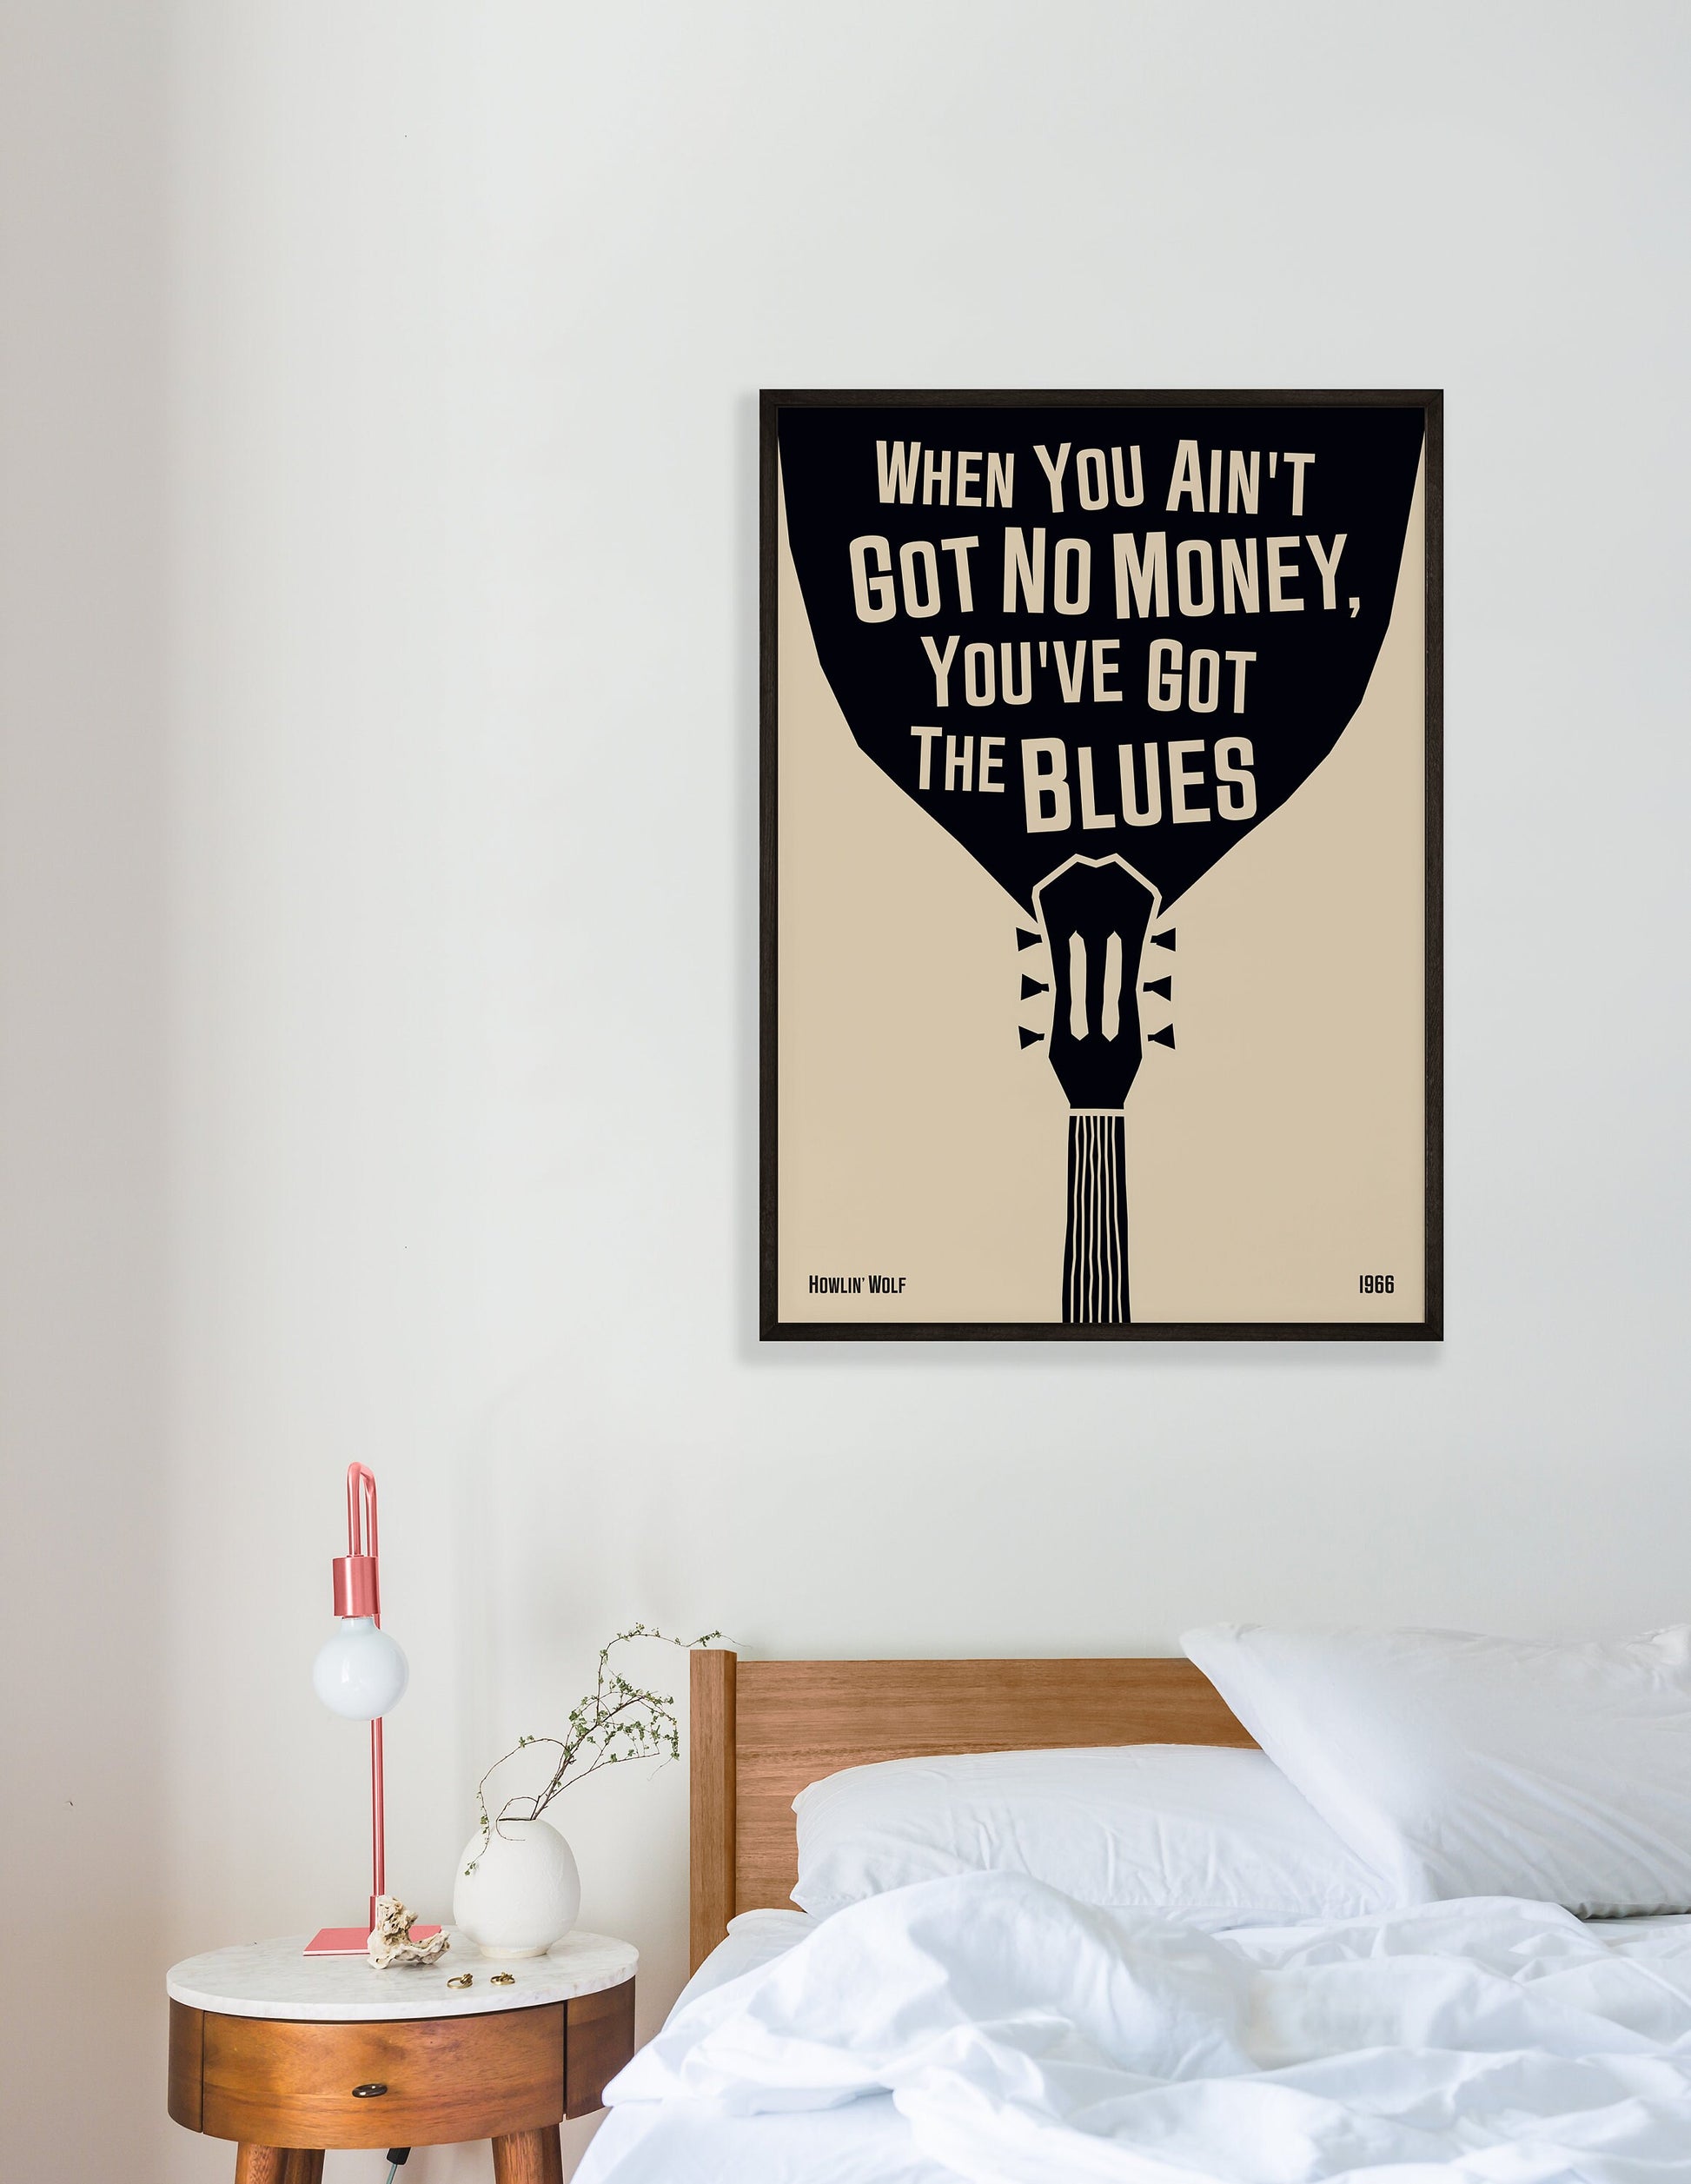 Cool blues music poster with guitar design, featuring a Howlin' Wolf quote. Retro black frame print, hanging on a white bedroom wall, perfect home decor.